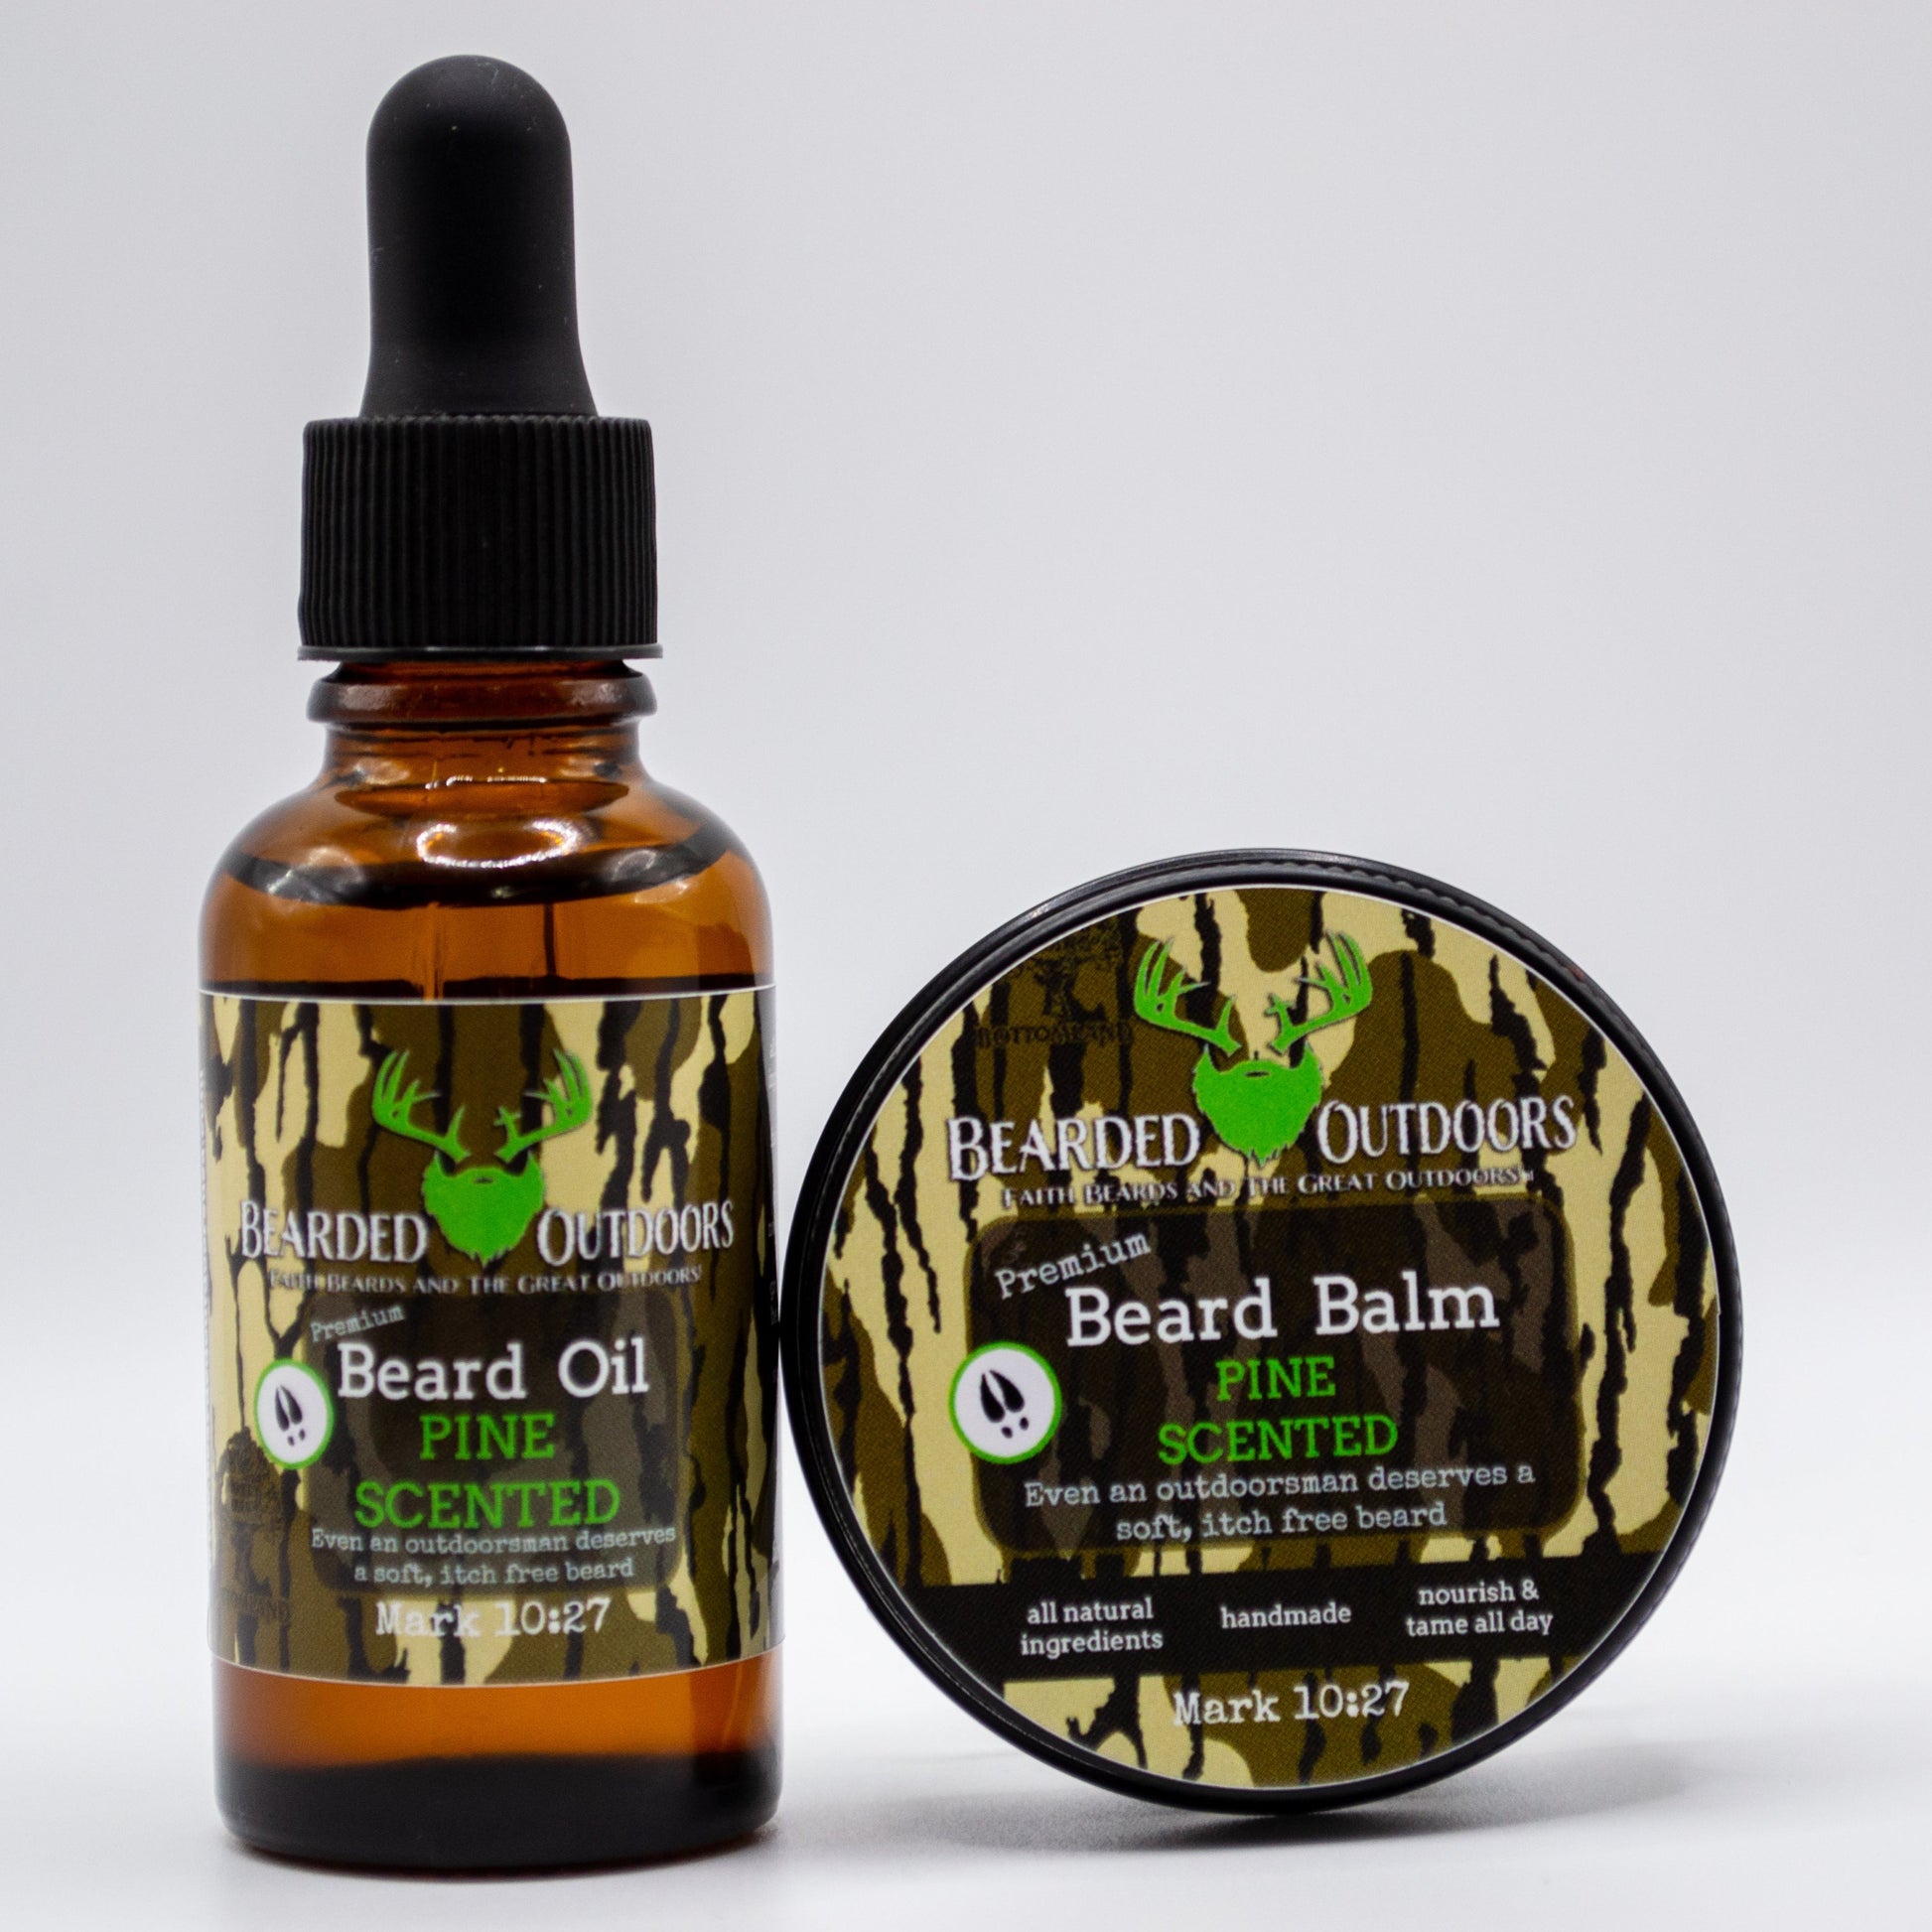 Mossy Oak Pine Scented Premium Beard Oil and Beard Balm wrapped in Bottomland Camo